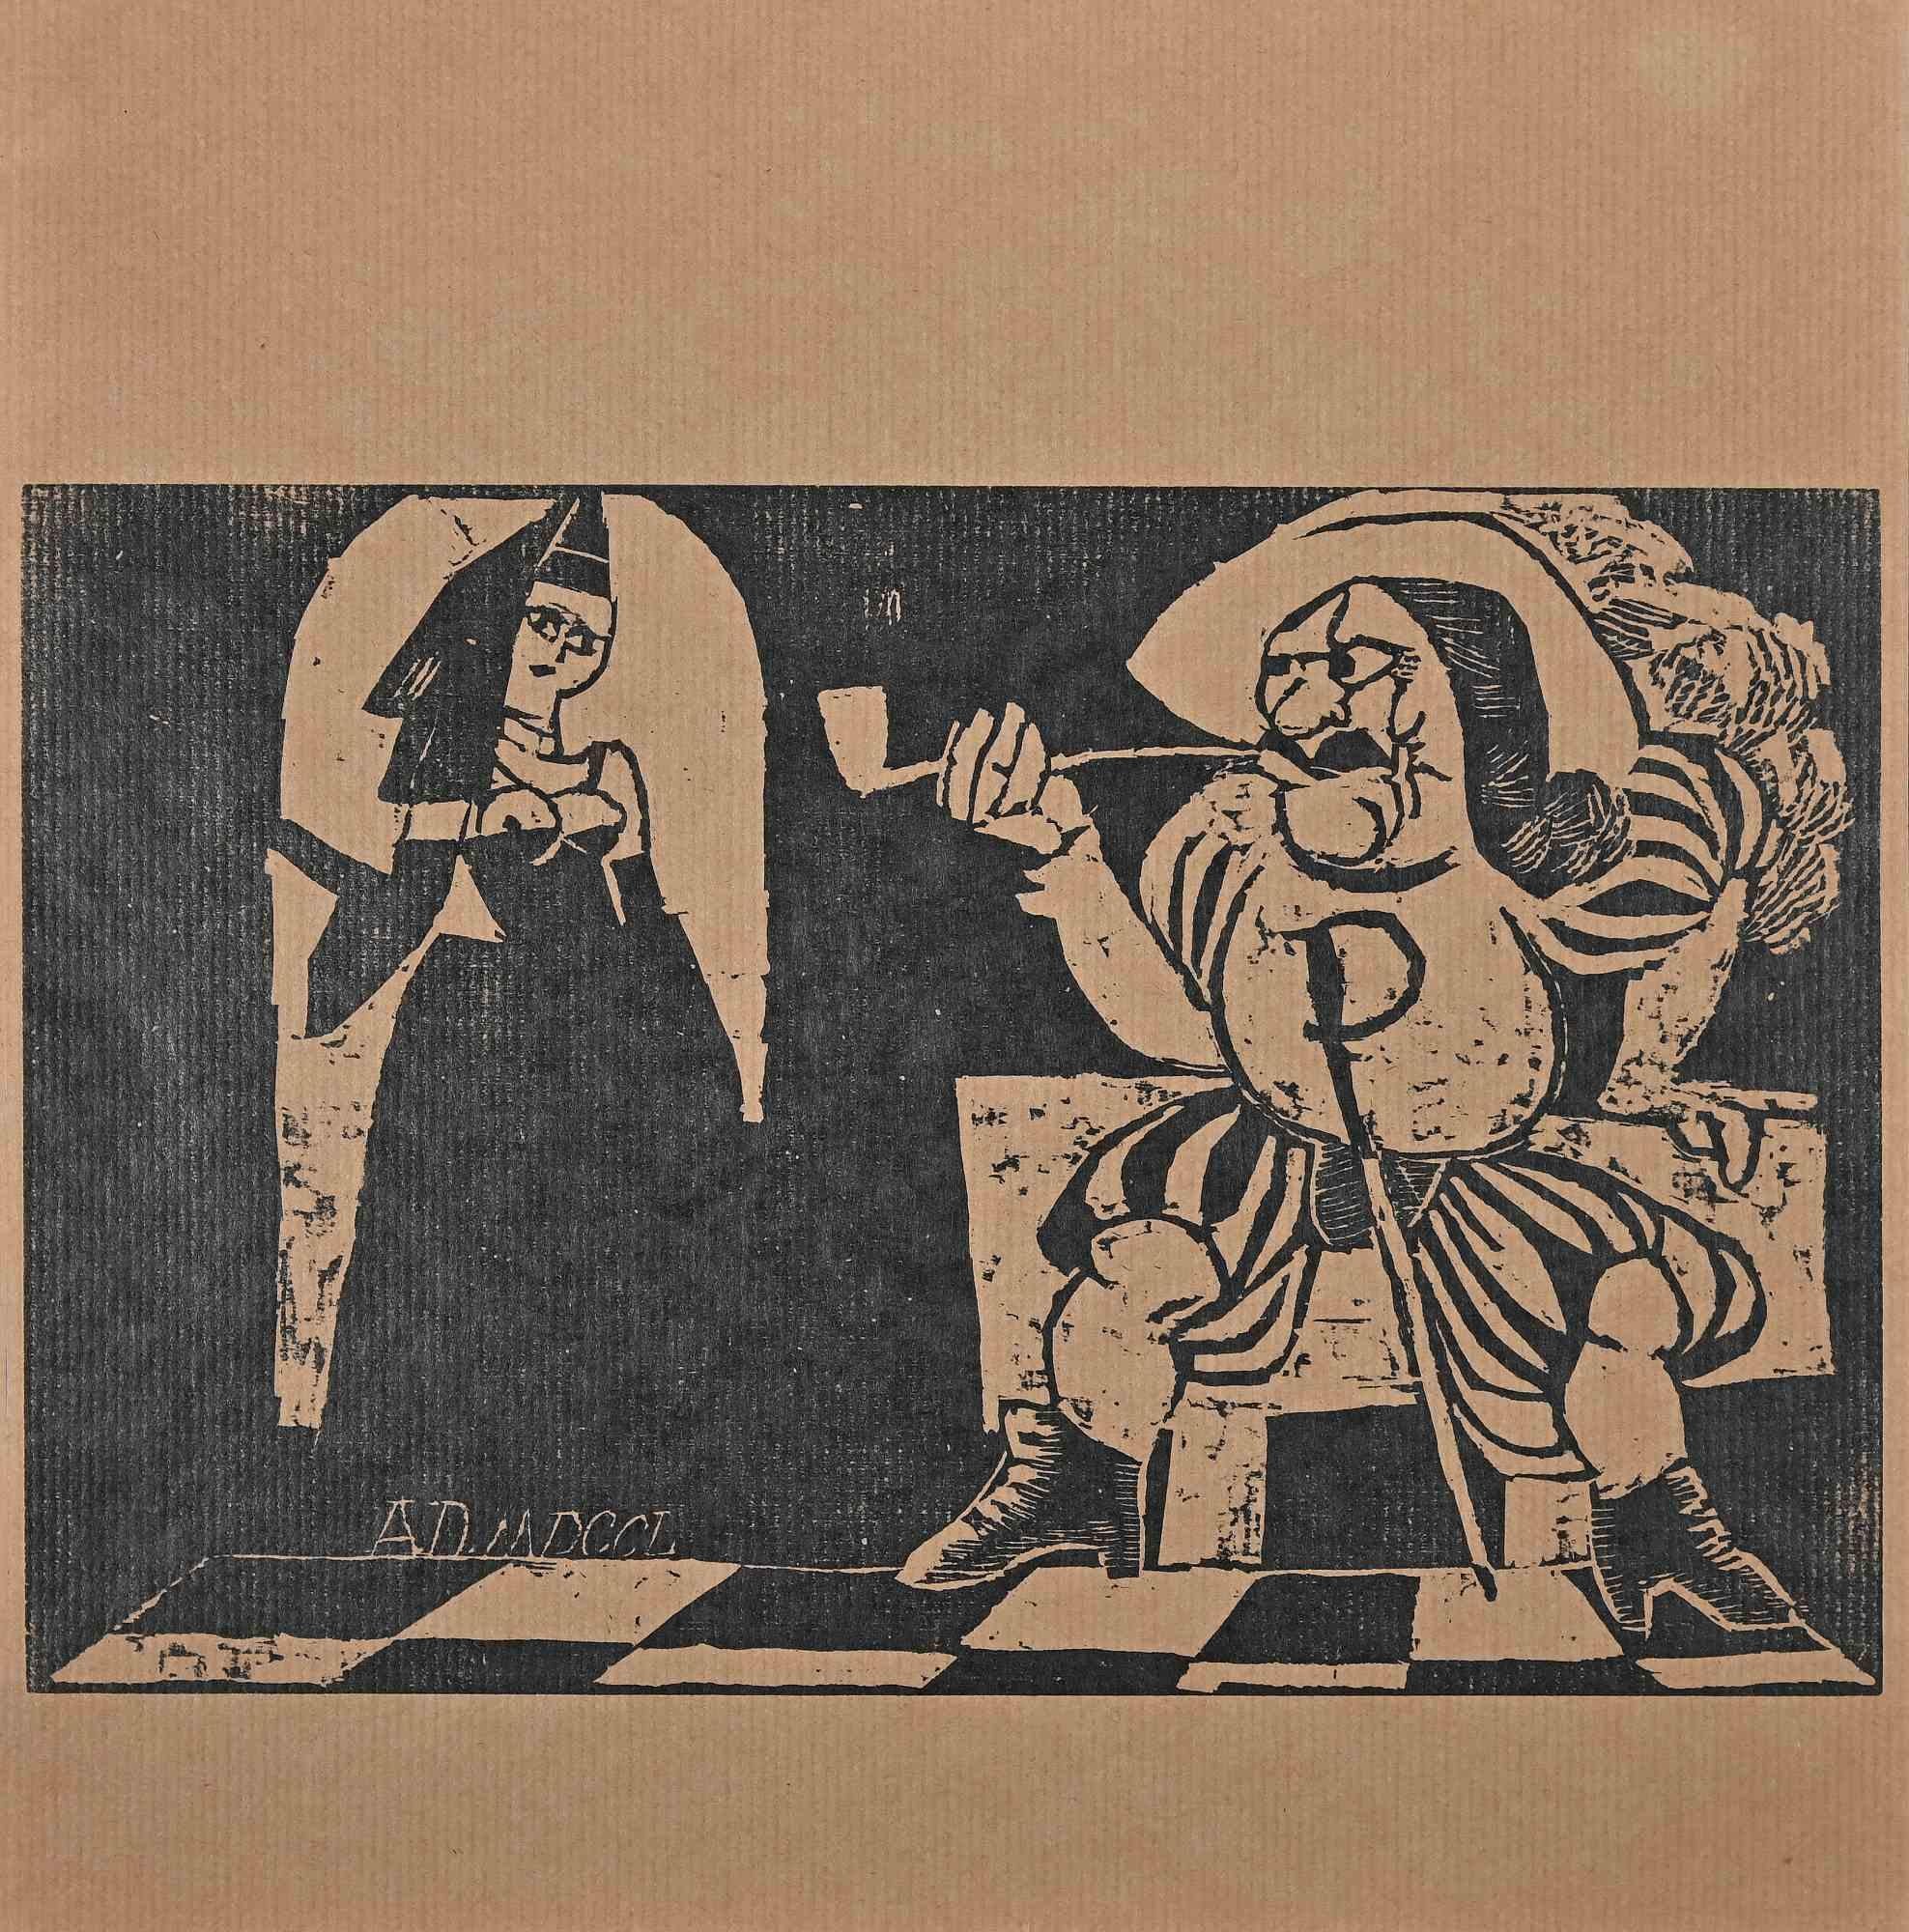 Figures is a woodcut print on paper realized by Carles Sterns in the Early 20th Century

Good conditions.

The artwork is depicted through soft strokes in a well-balanced composition.